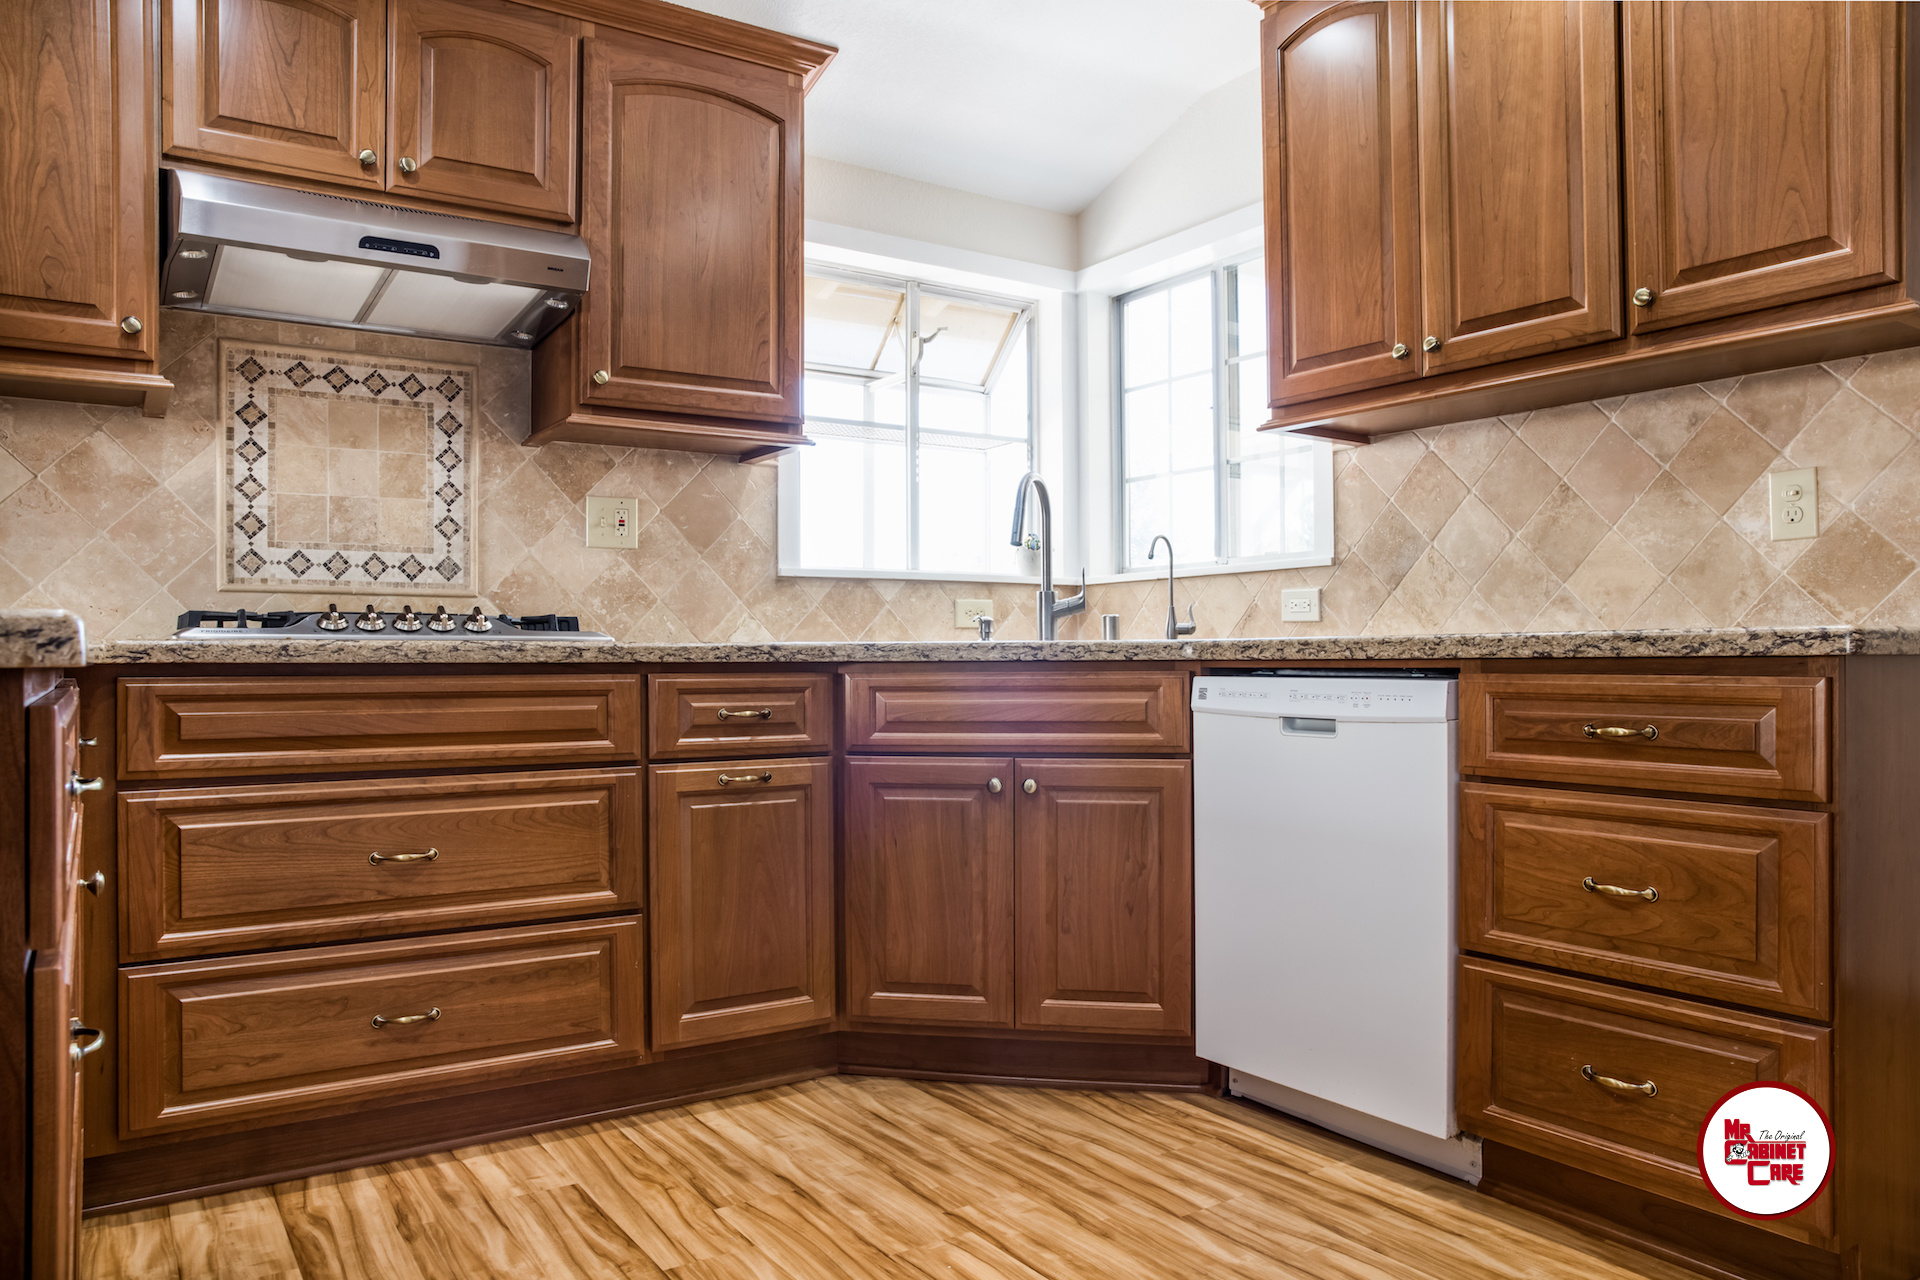 Kitchen Remodeling Services in Dana Point